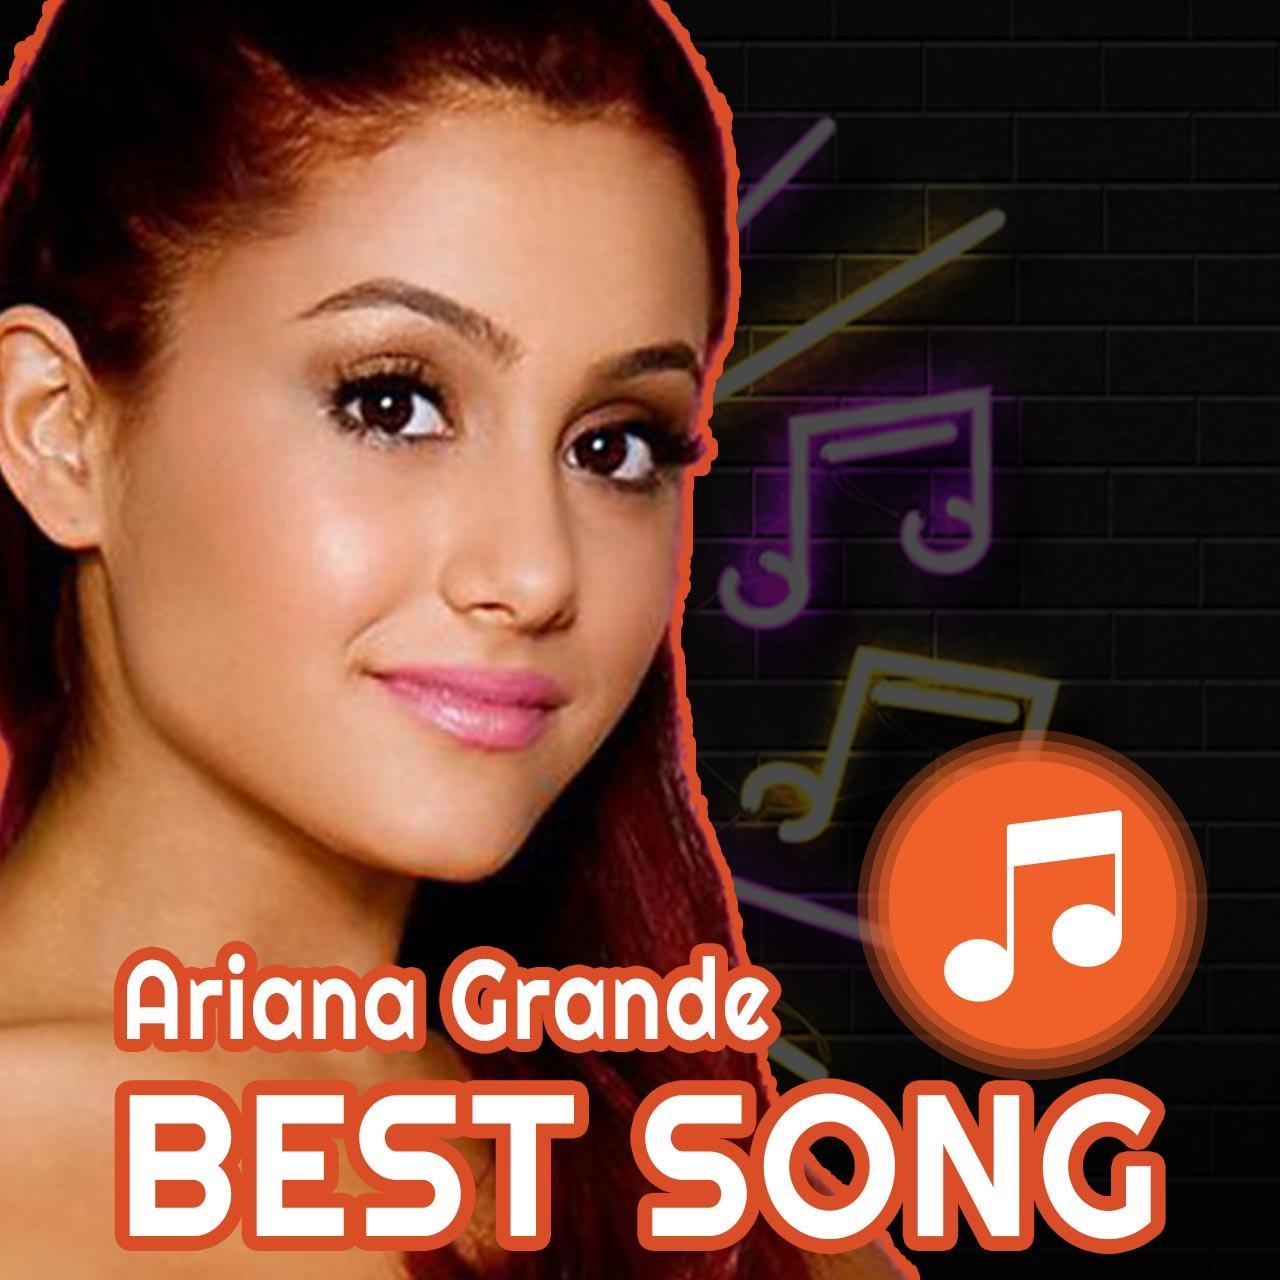 Ariana Grande Thank U Next Best Songs 2019 For Android Apk Download - ariana grande thank u next roblox music video